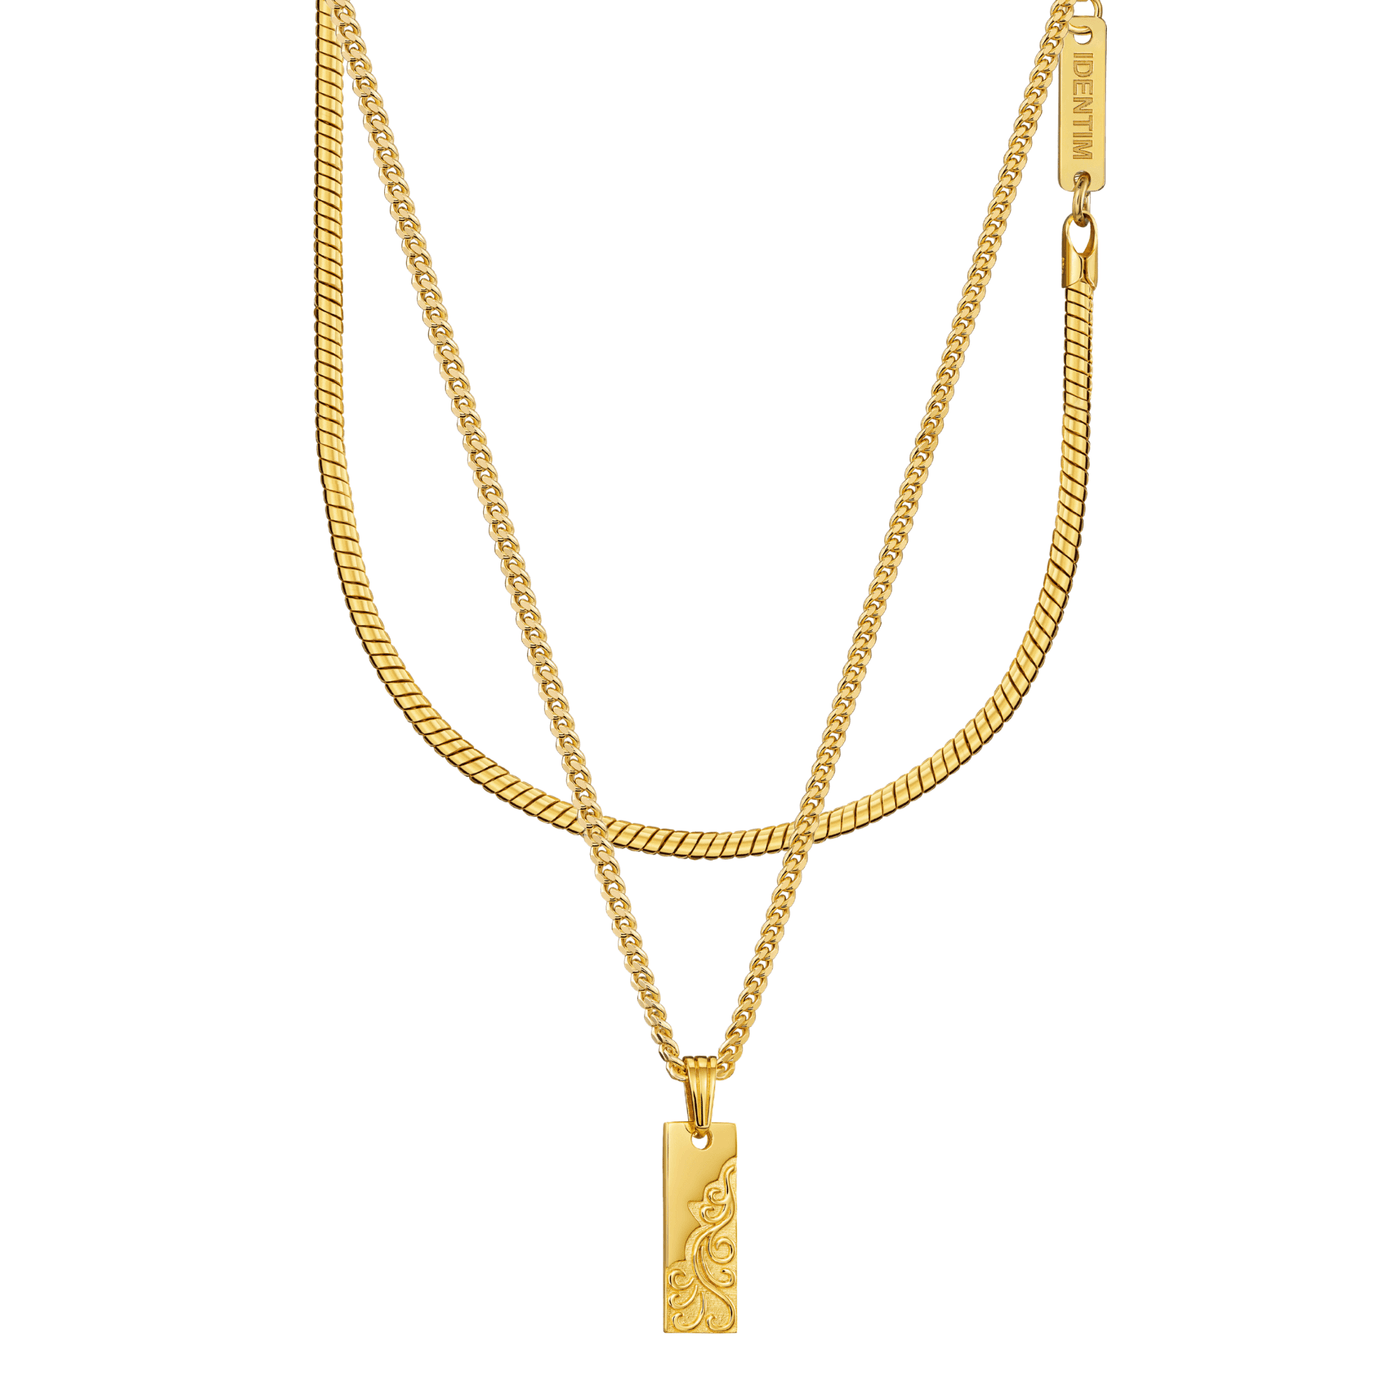 PLATE NECKLACE SNAKE CHAIN SET 925 SILVER 18 CARAT GOLD PLATED